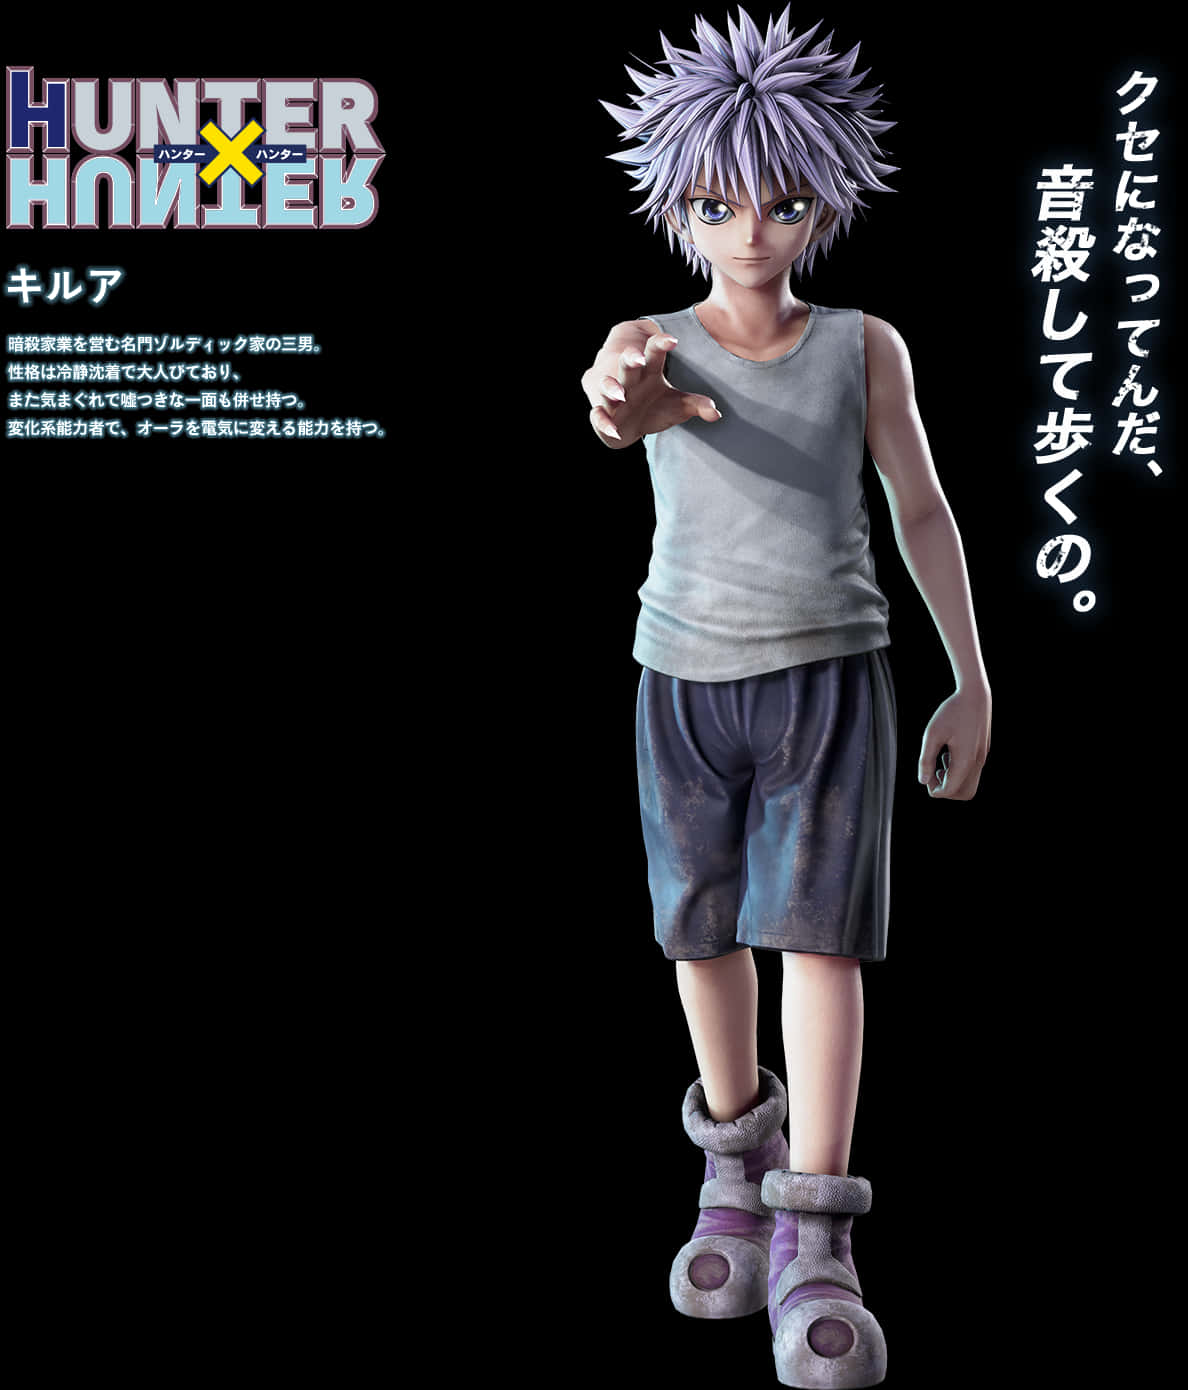 A Cartoon Character With Purple Hair And Purple Shorts